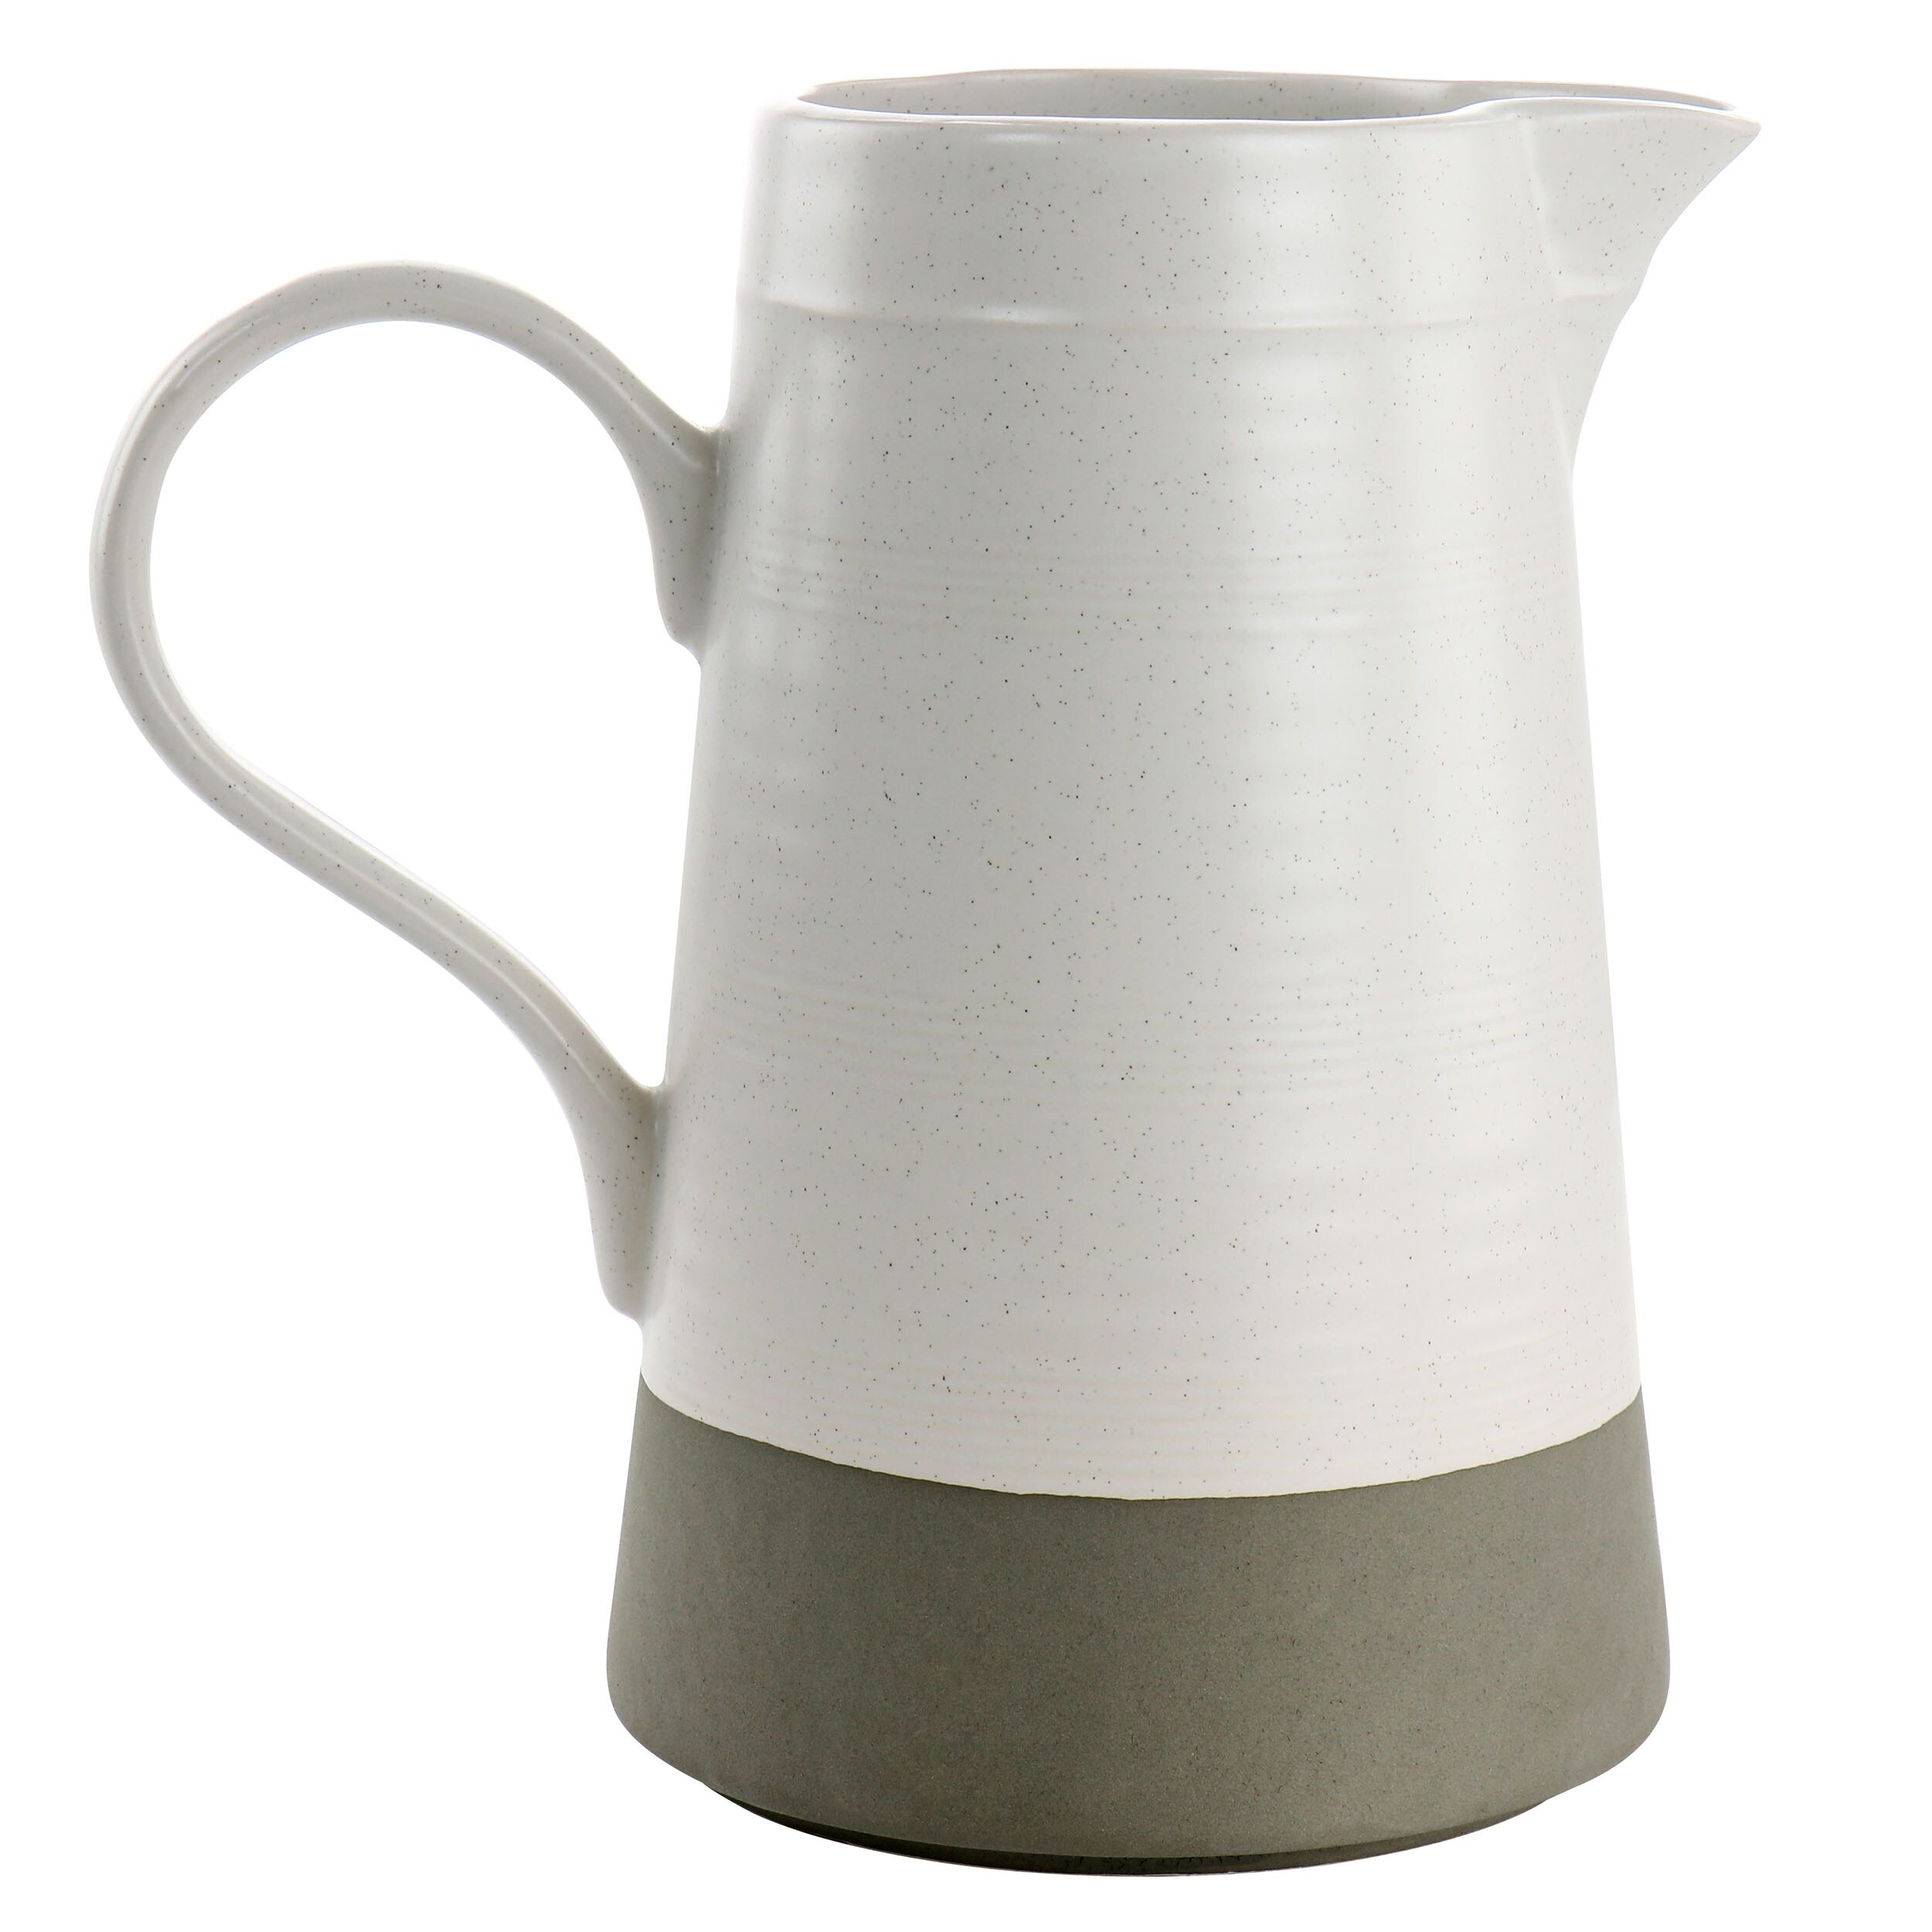 https://ak1.ostkcdn.com/images/products/is/images/direct/cbe96a5c5aca24d3b9b0c06f499f8398532d8496/Large-60oz-Serving-Pitcher-in-Off-White.jpg